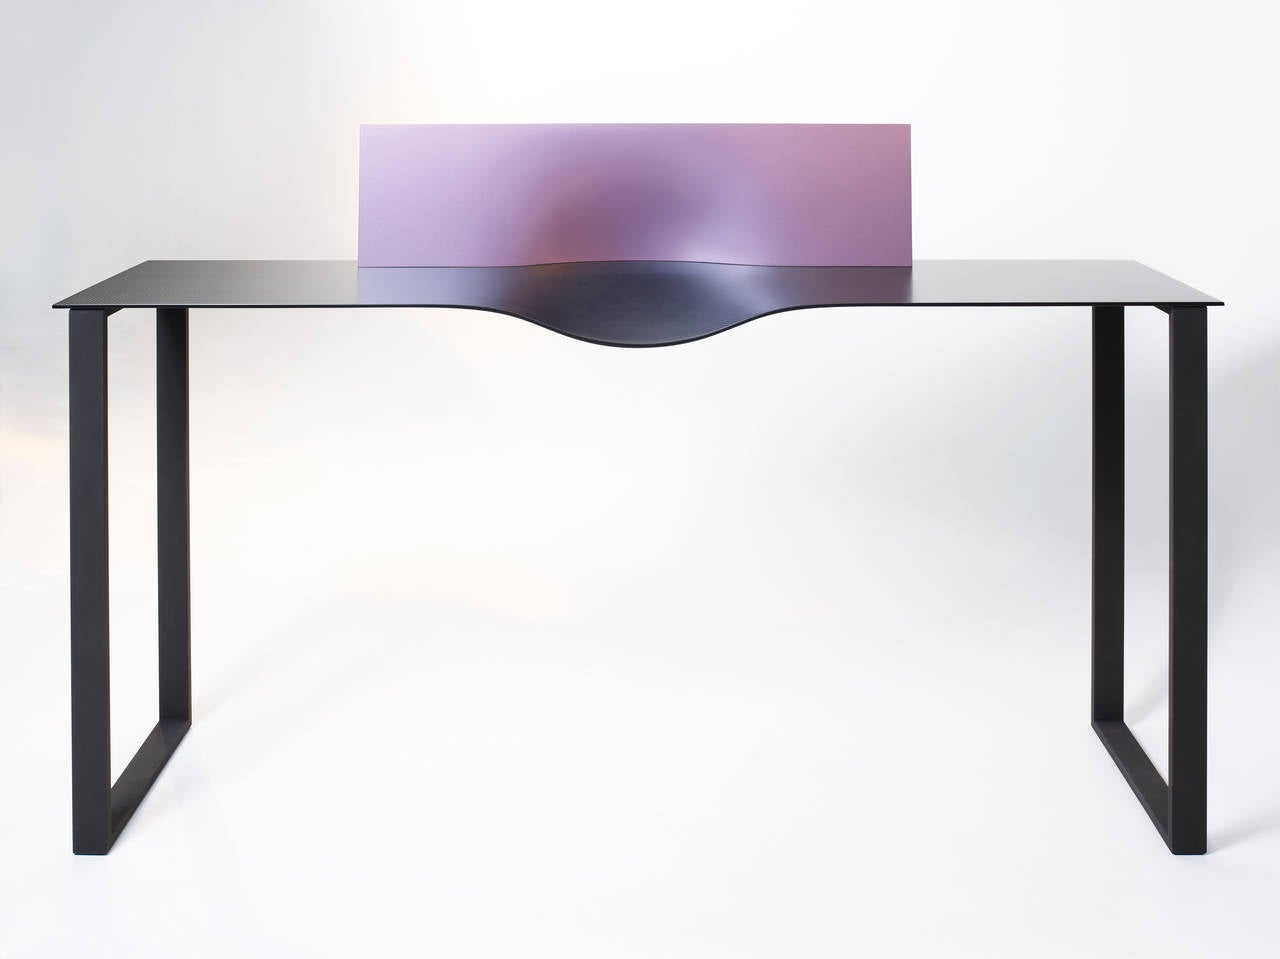 ‘Matrice 09’ is a minimalist, black carbon fiber console, with on top a mauve lacquered fiberglass unit, designed and produced by the creative and technical team of France’s most important engineering practice for contemporary design and in